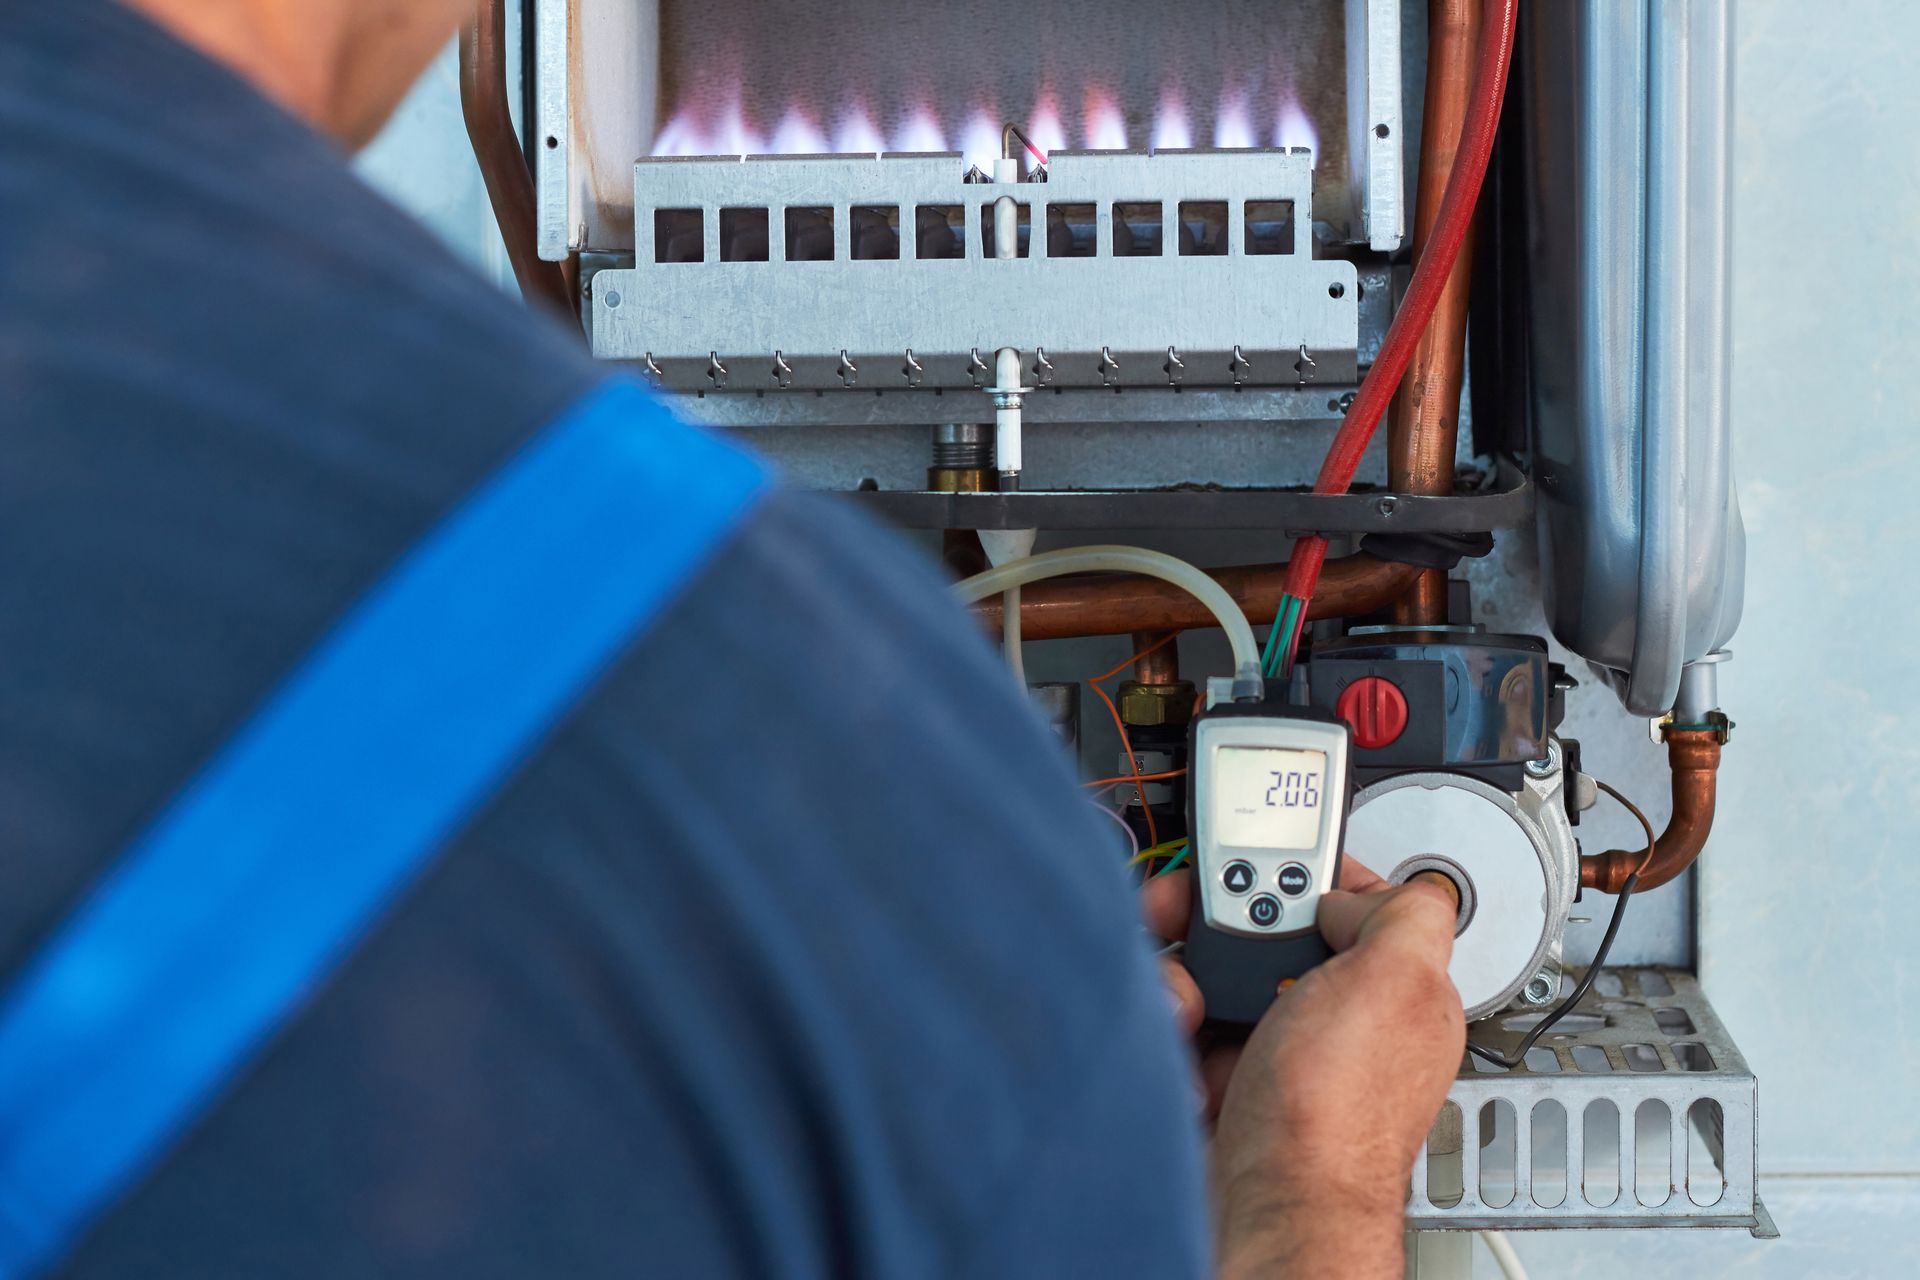 A skilled handyman diligently repairs a gas boiler, carefully inspecting and troubleshooting the unit.